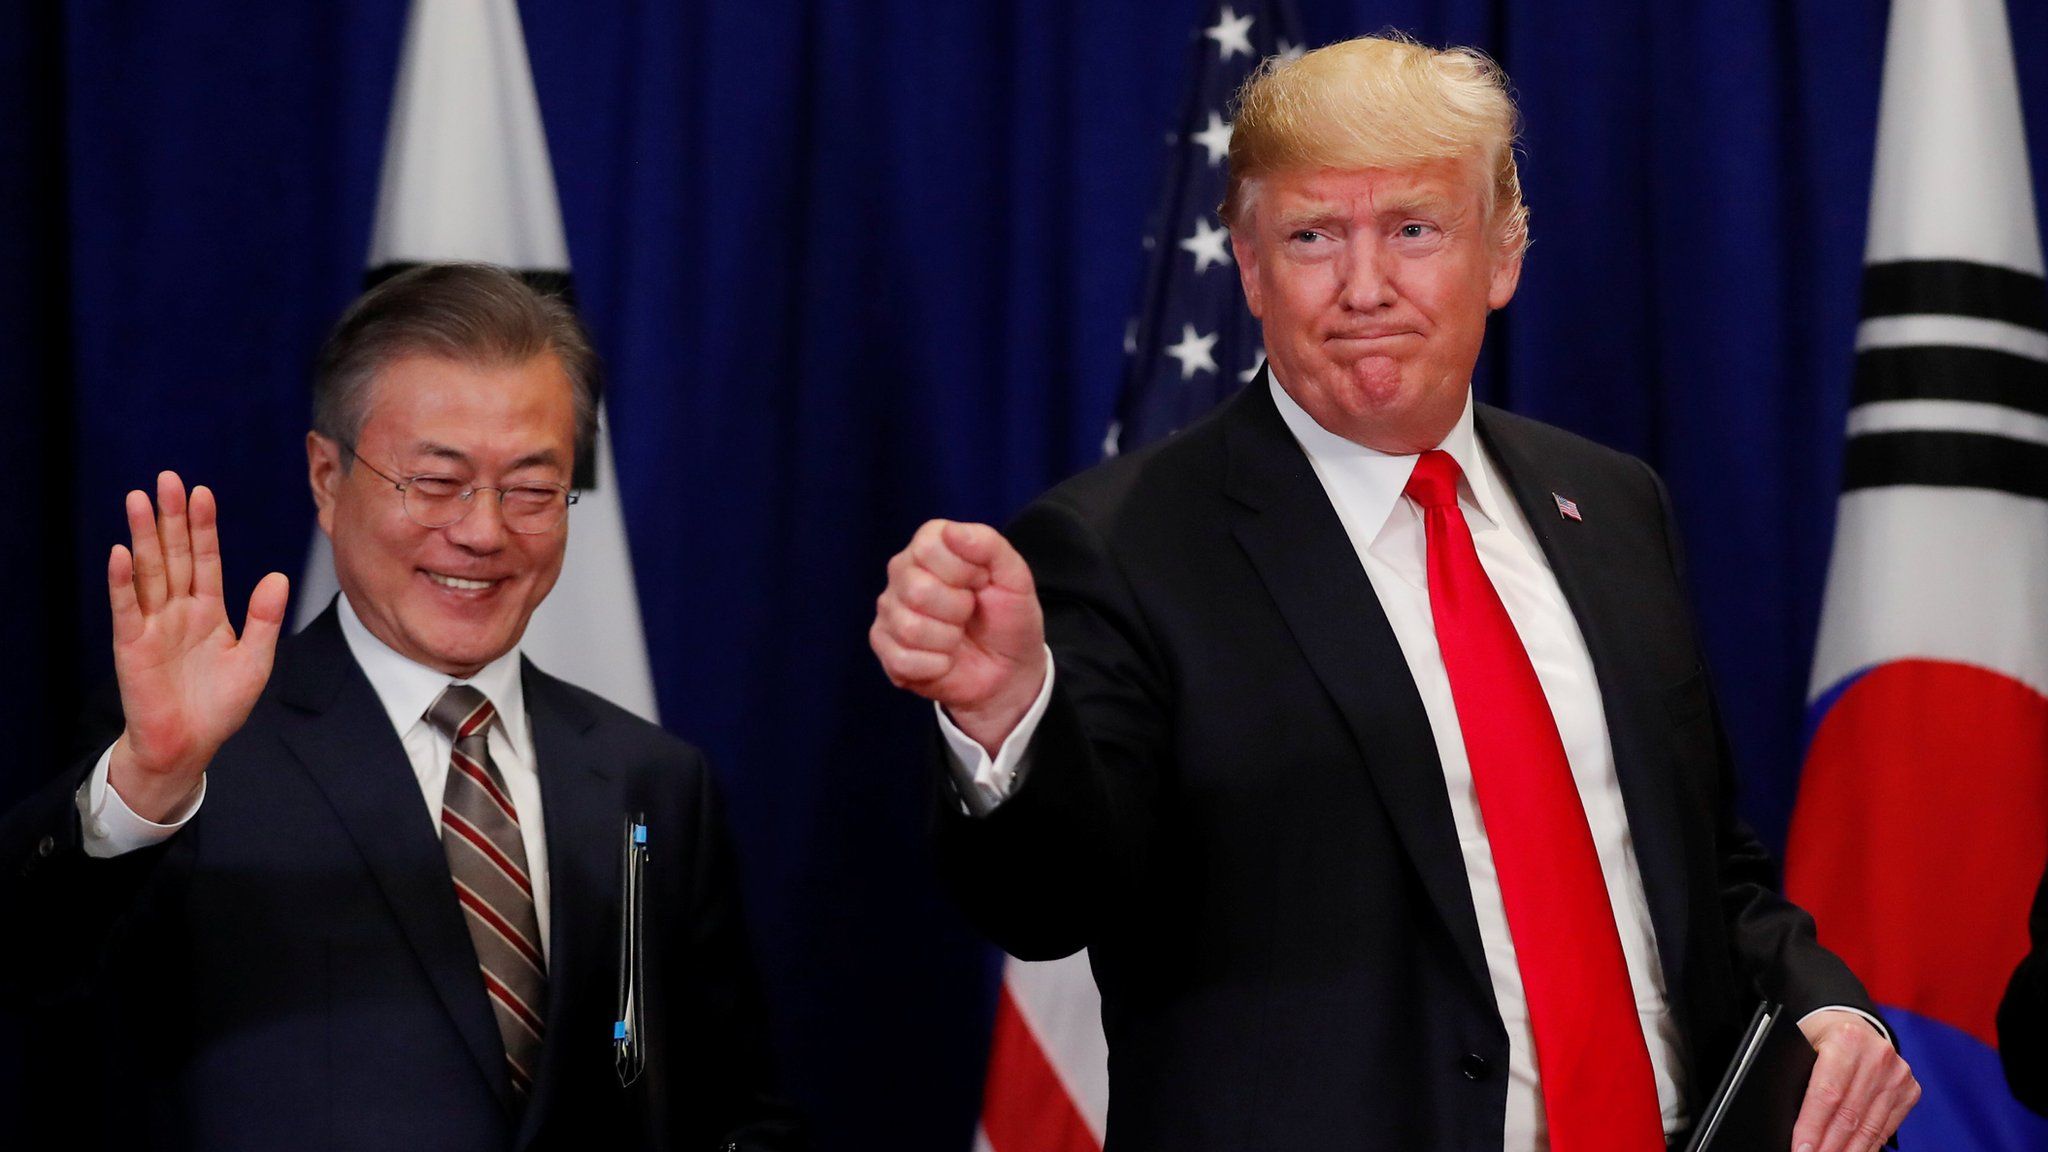 U.S. President Donald Trump and South Korean President Moon Jae-in gesture after signing the U.S.-Korea Free Trade Agreement on during a ceremony on the sidelines of the 73rd United Nations General Assembly in New York, U.S., September 24, 2018.